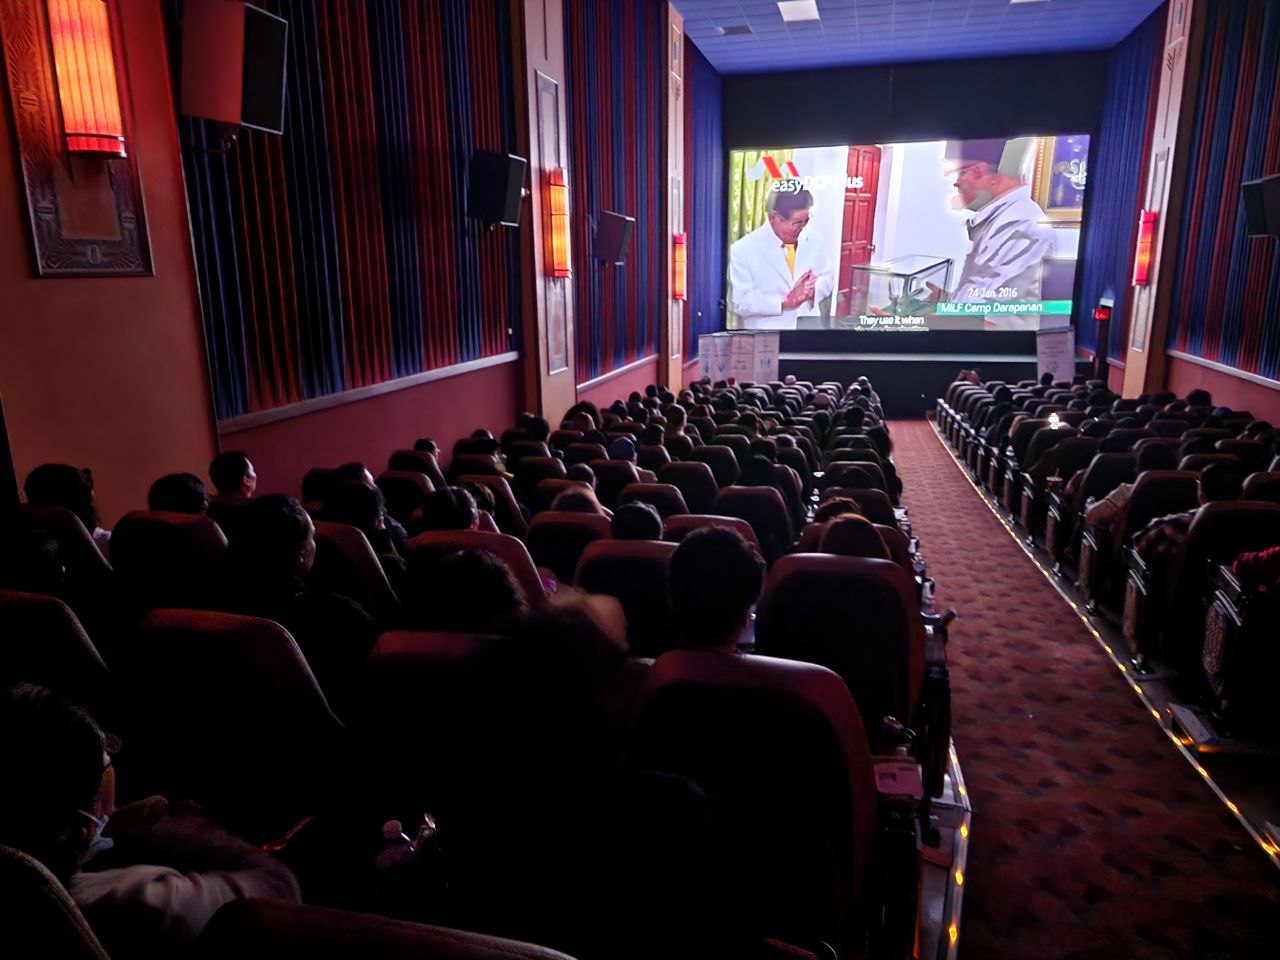 Theater packed with intrigued audience